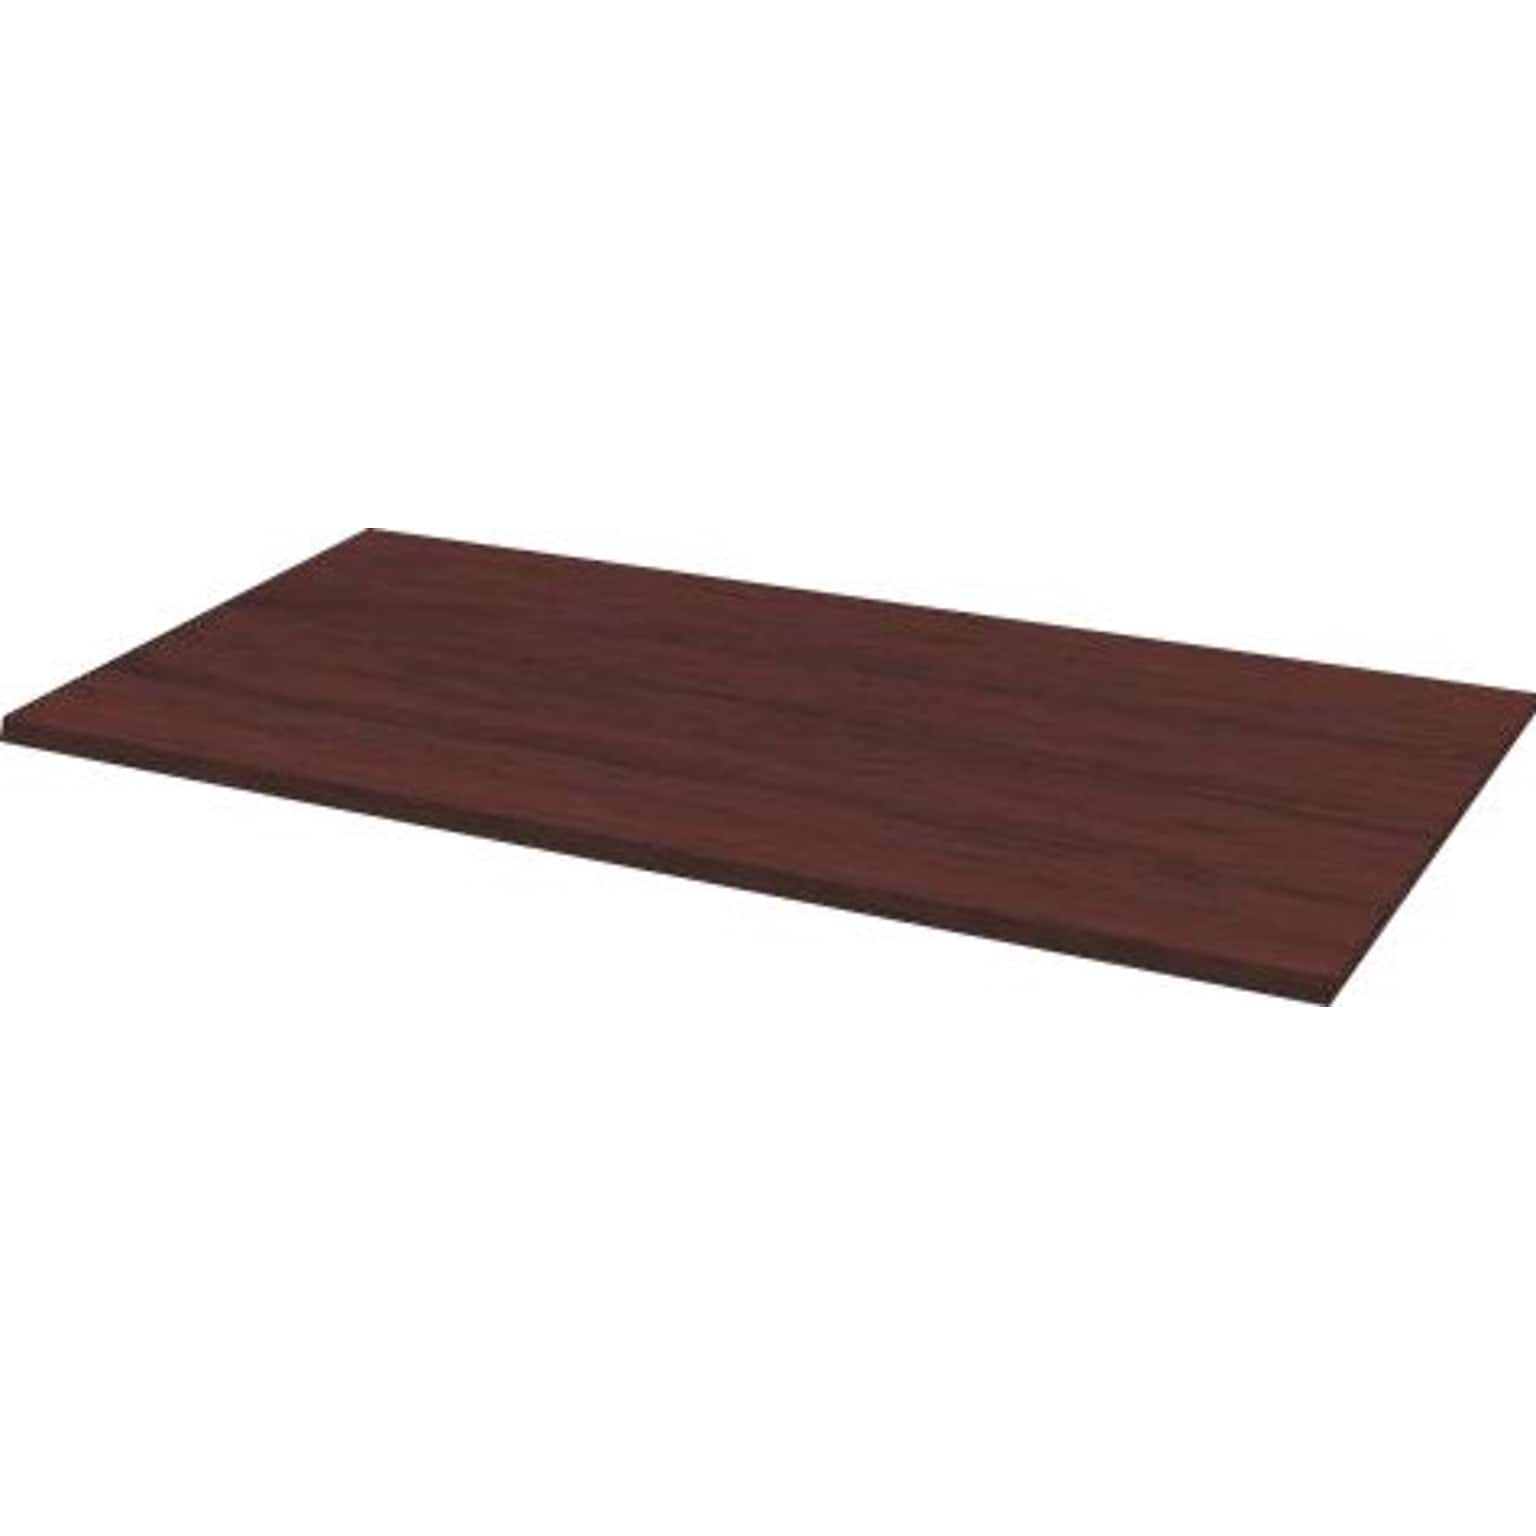 HON® Preside Laminate Rectangle Conference Tabletop 60W, Mahogany, 1 1/8H x 60W x 30D